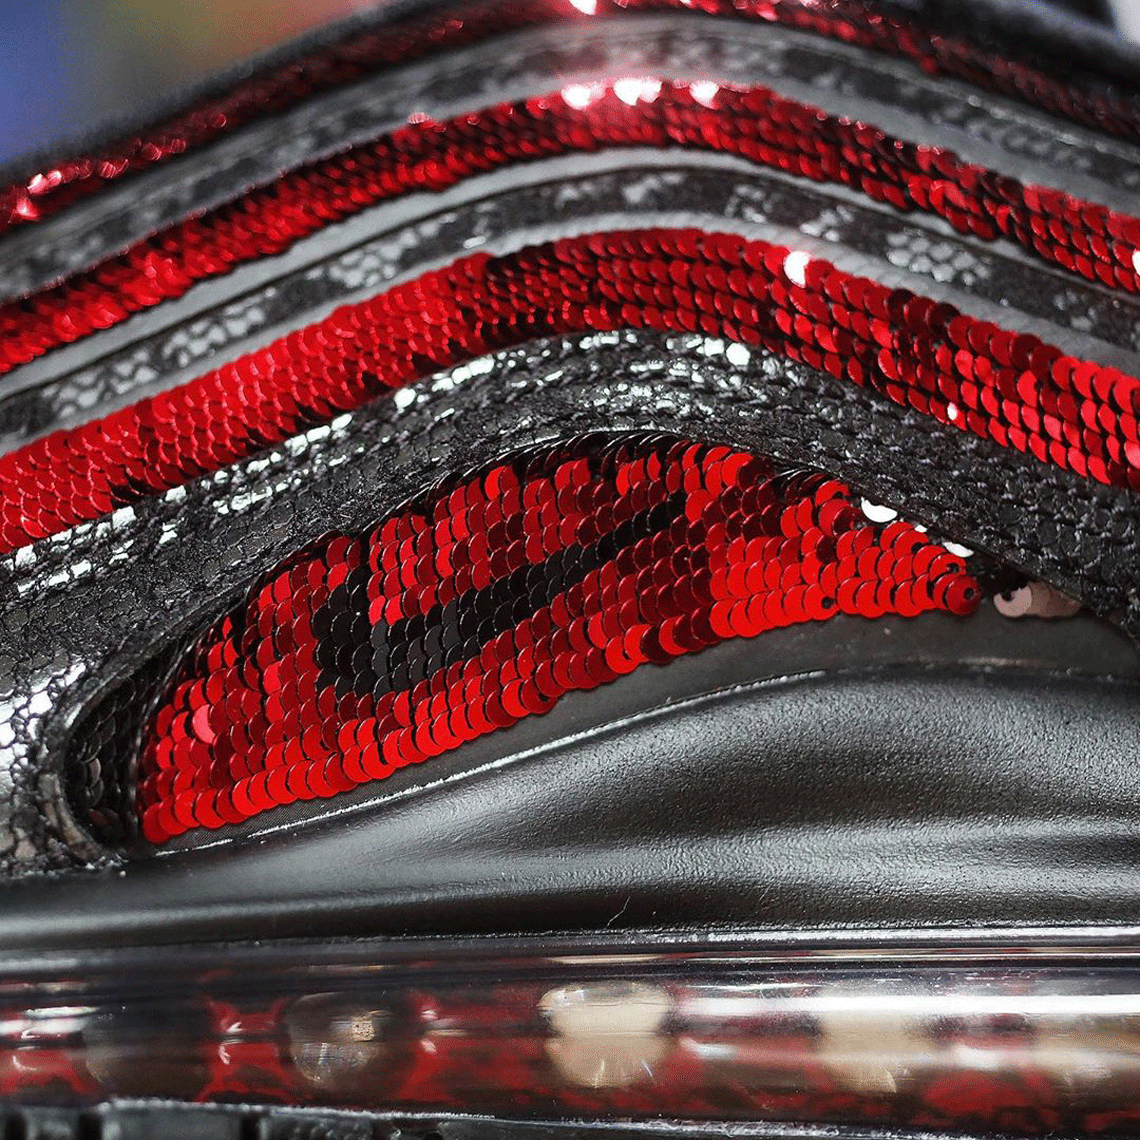 nike-air-max-97-sequin-black-red side close up